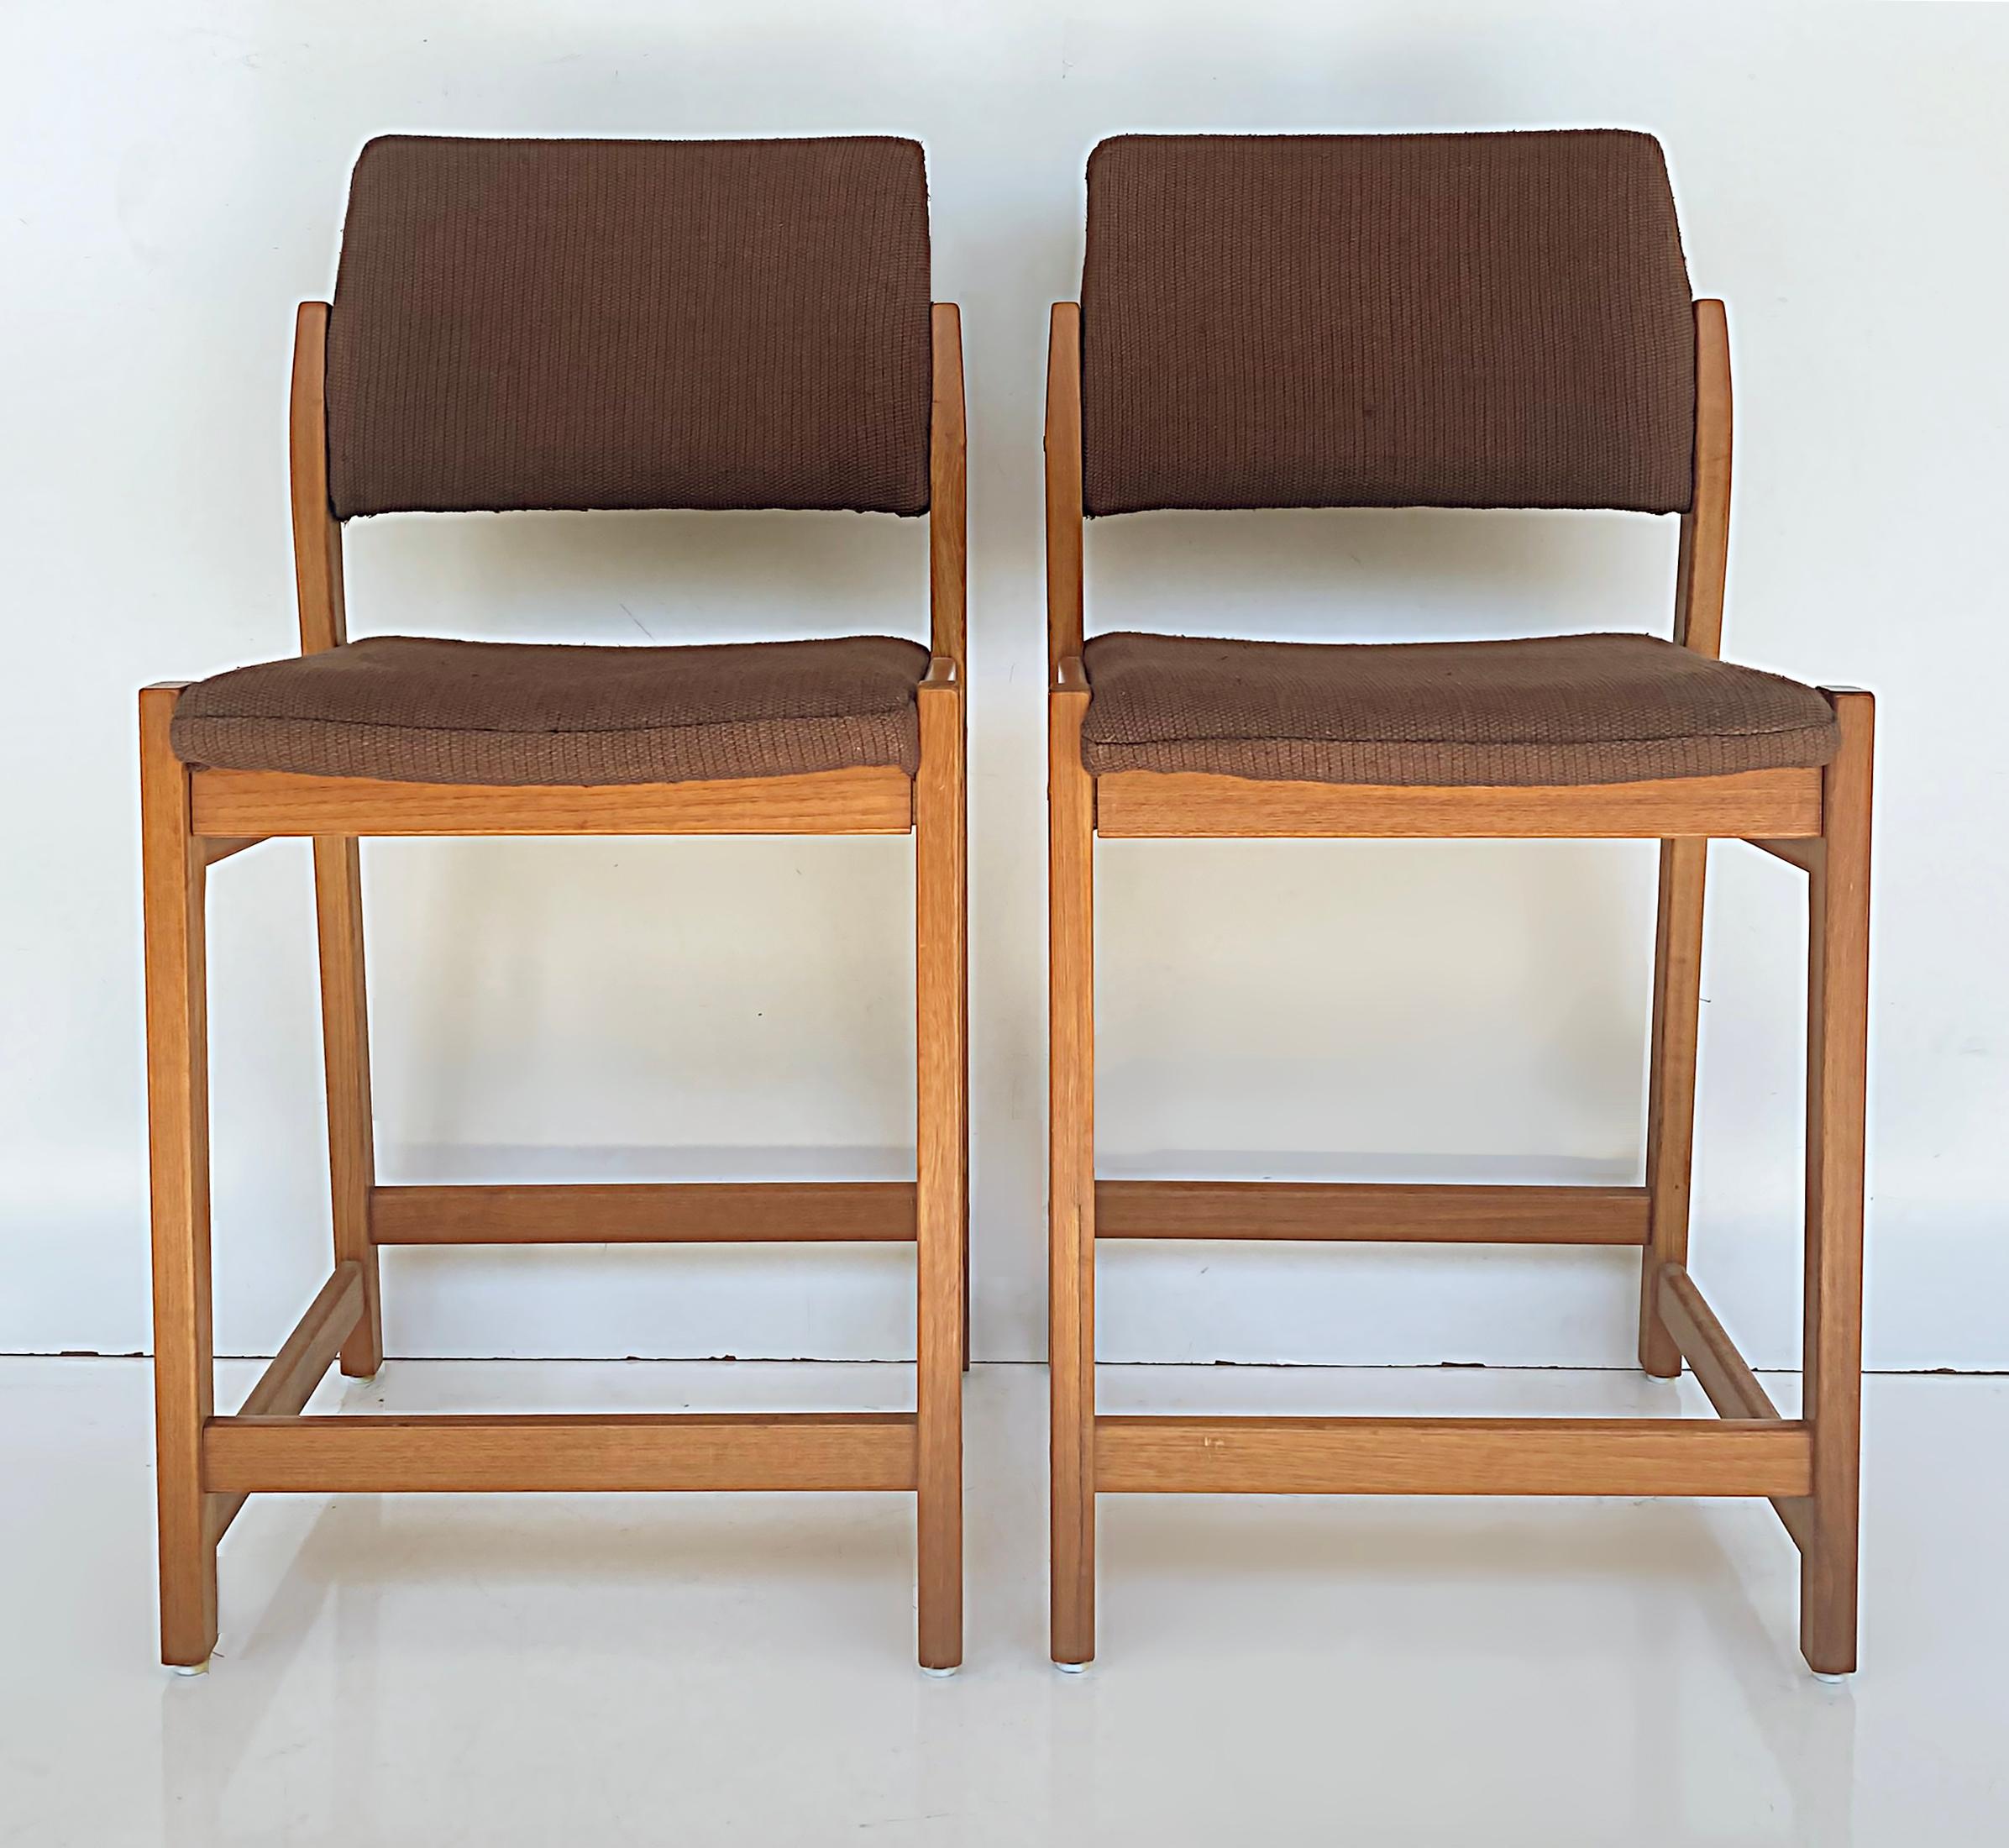 Svegards Markayrd Scandinavian Modern Counter Barstools, Newly Upholstered 

Offered for sale is a pair of Scandinavian modern counter height barstools by Svegards Markayrd. The pair is marked Svegards Markayrd Sweden on the underside of the seats